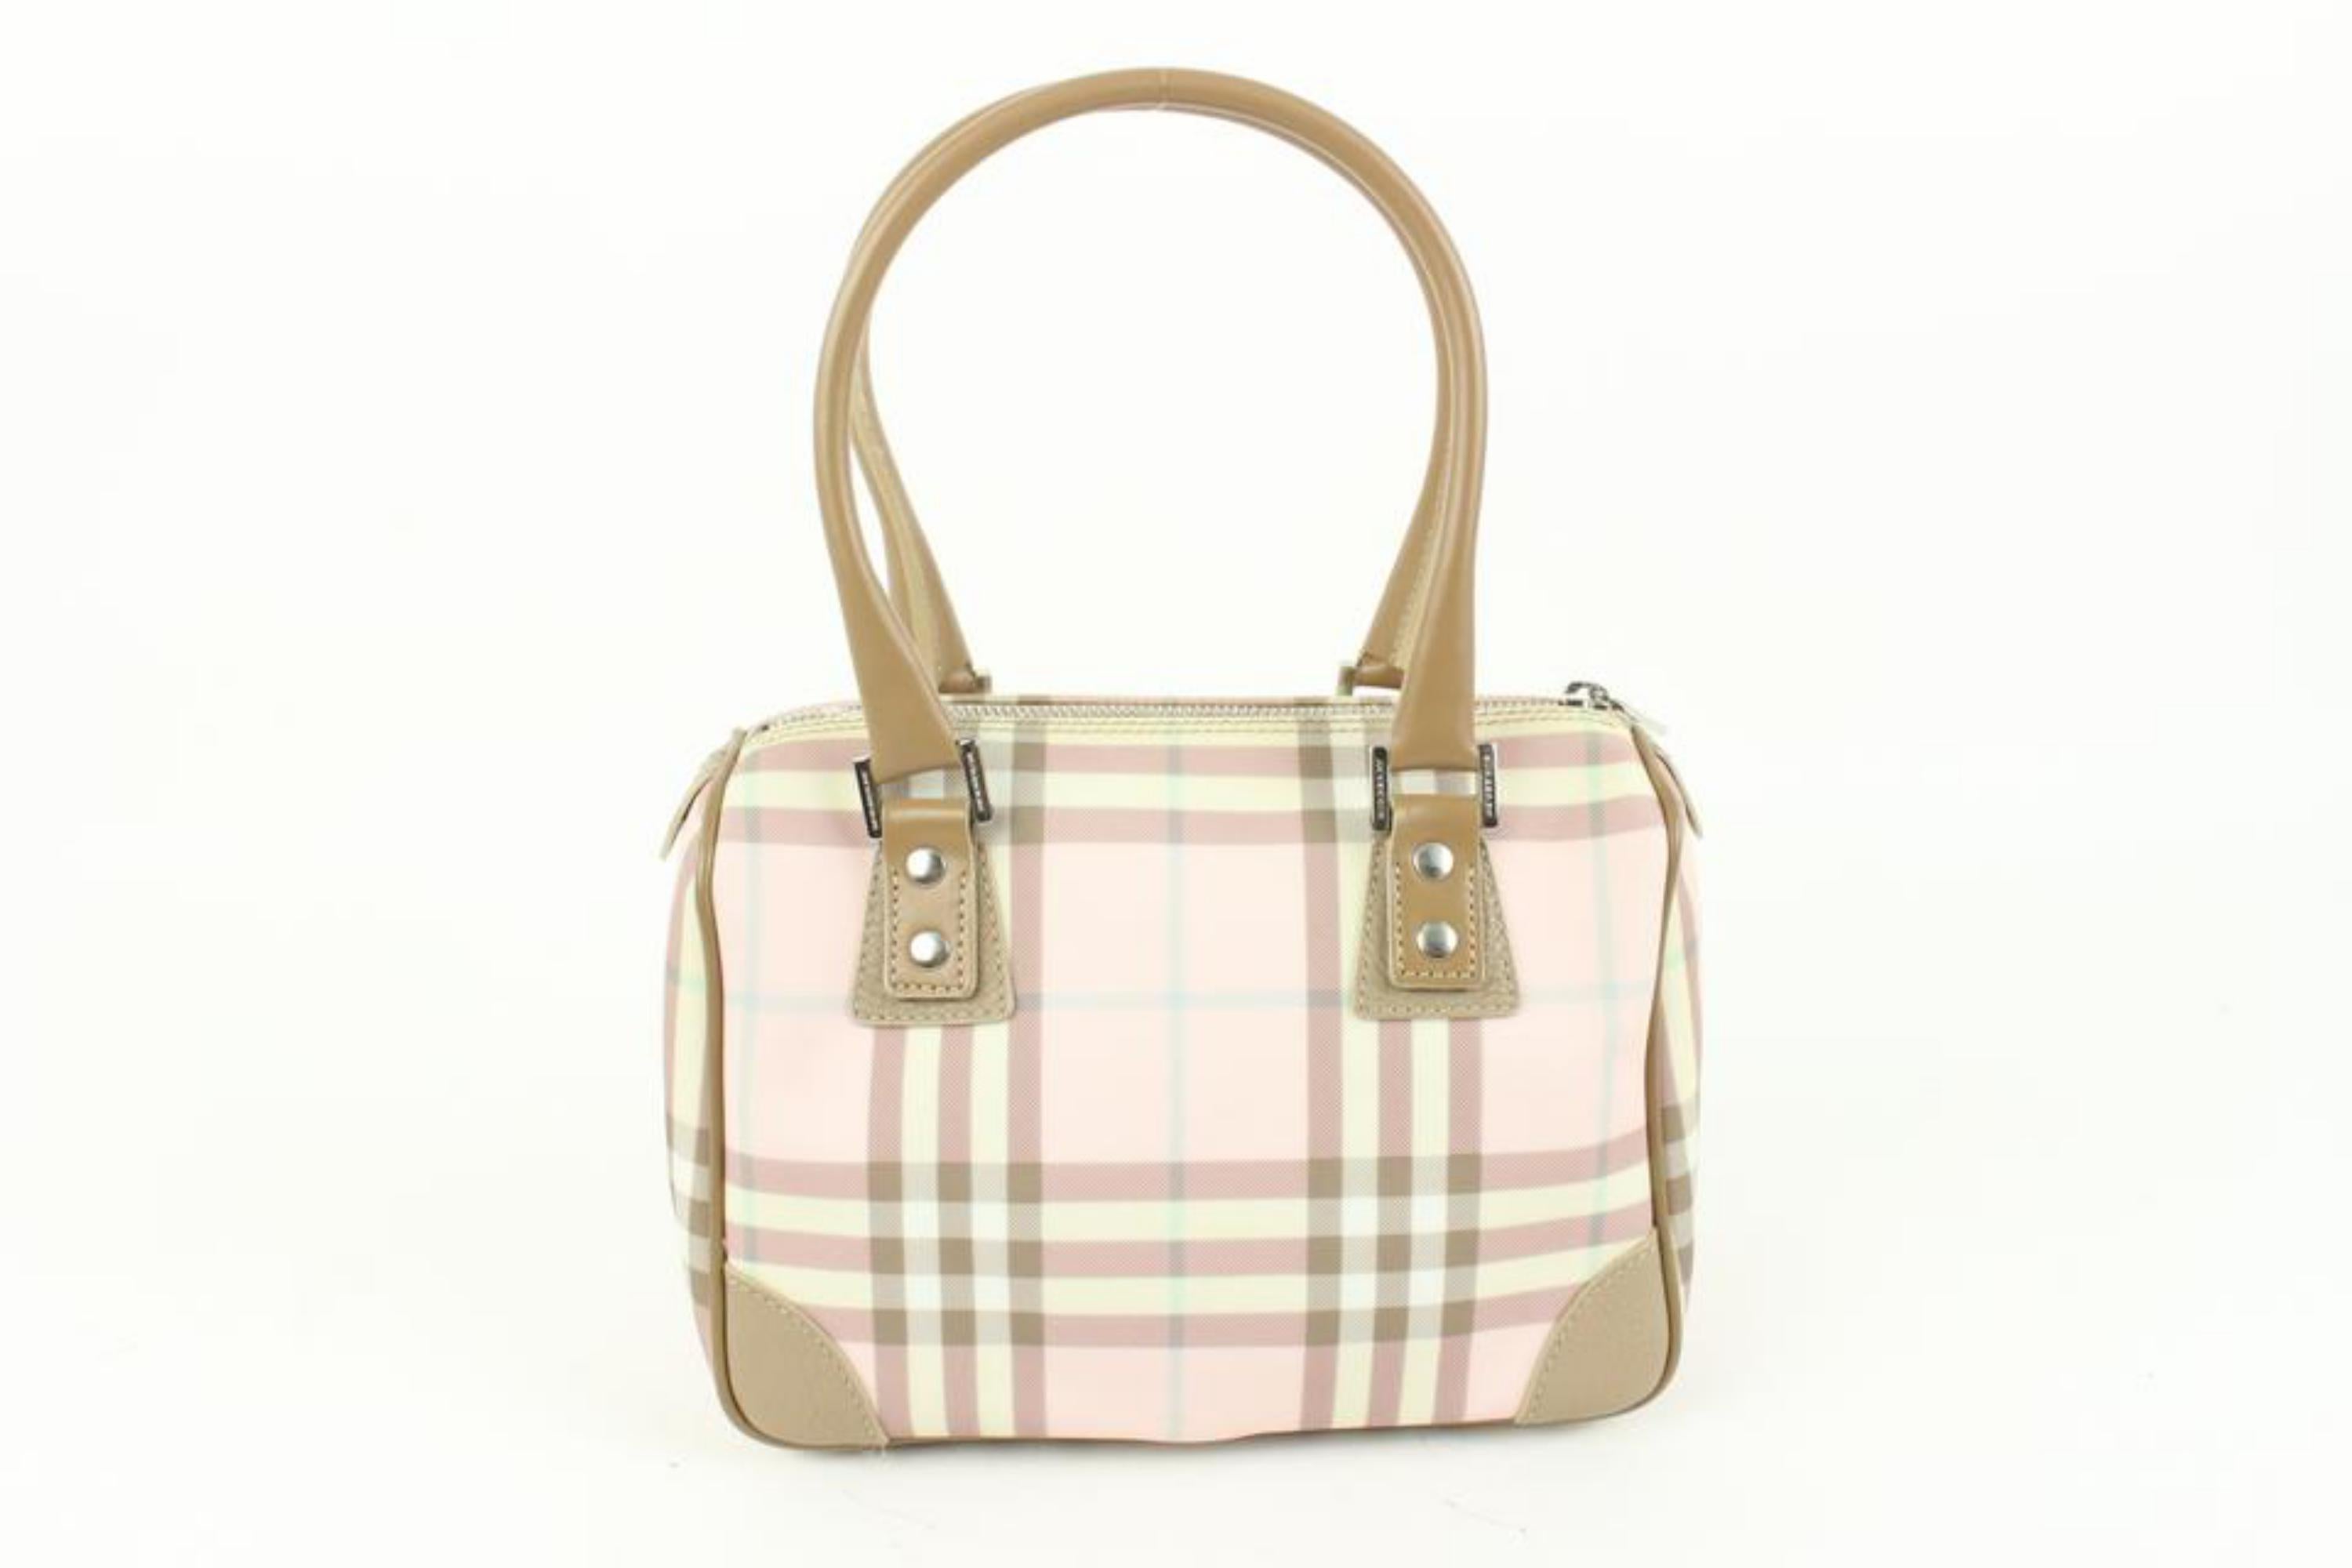 Burberry London Rare Nova Pink Cotton Candy Check Satchel Bag 54b414s In Good Condition For Sale In Dix hills, NY